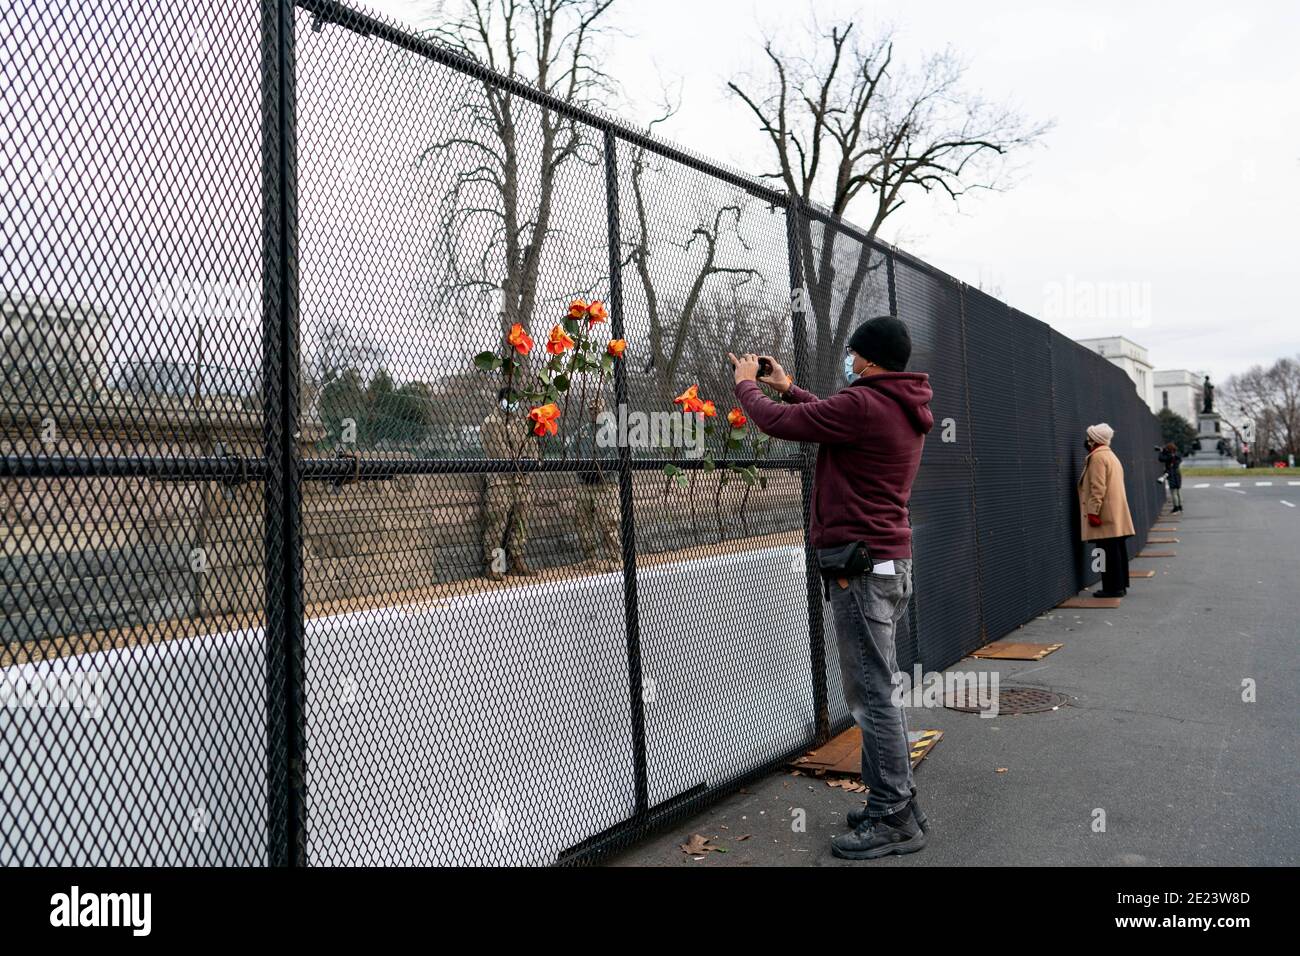 Washington, USA. 12th Jan, 2021. People take photos of the U.S. Capitol Building across a barrier fence in Washington, DC, the United States, Jan. 11, 2021. TO GO WITH 'U.S. House Democrats unveil article of impeachment against Trump'. Credit: Liu Jie/Xinhua/Alamy Live News Stock Photo